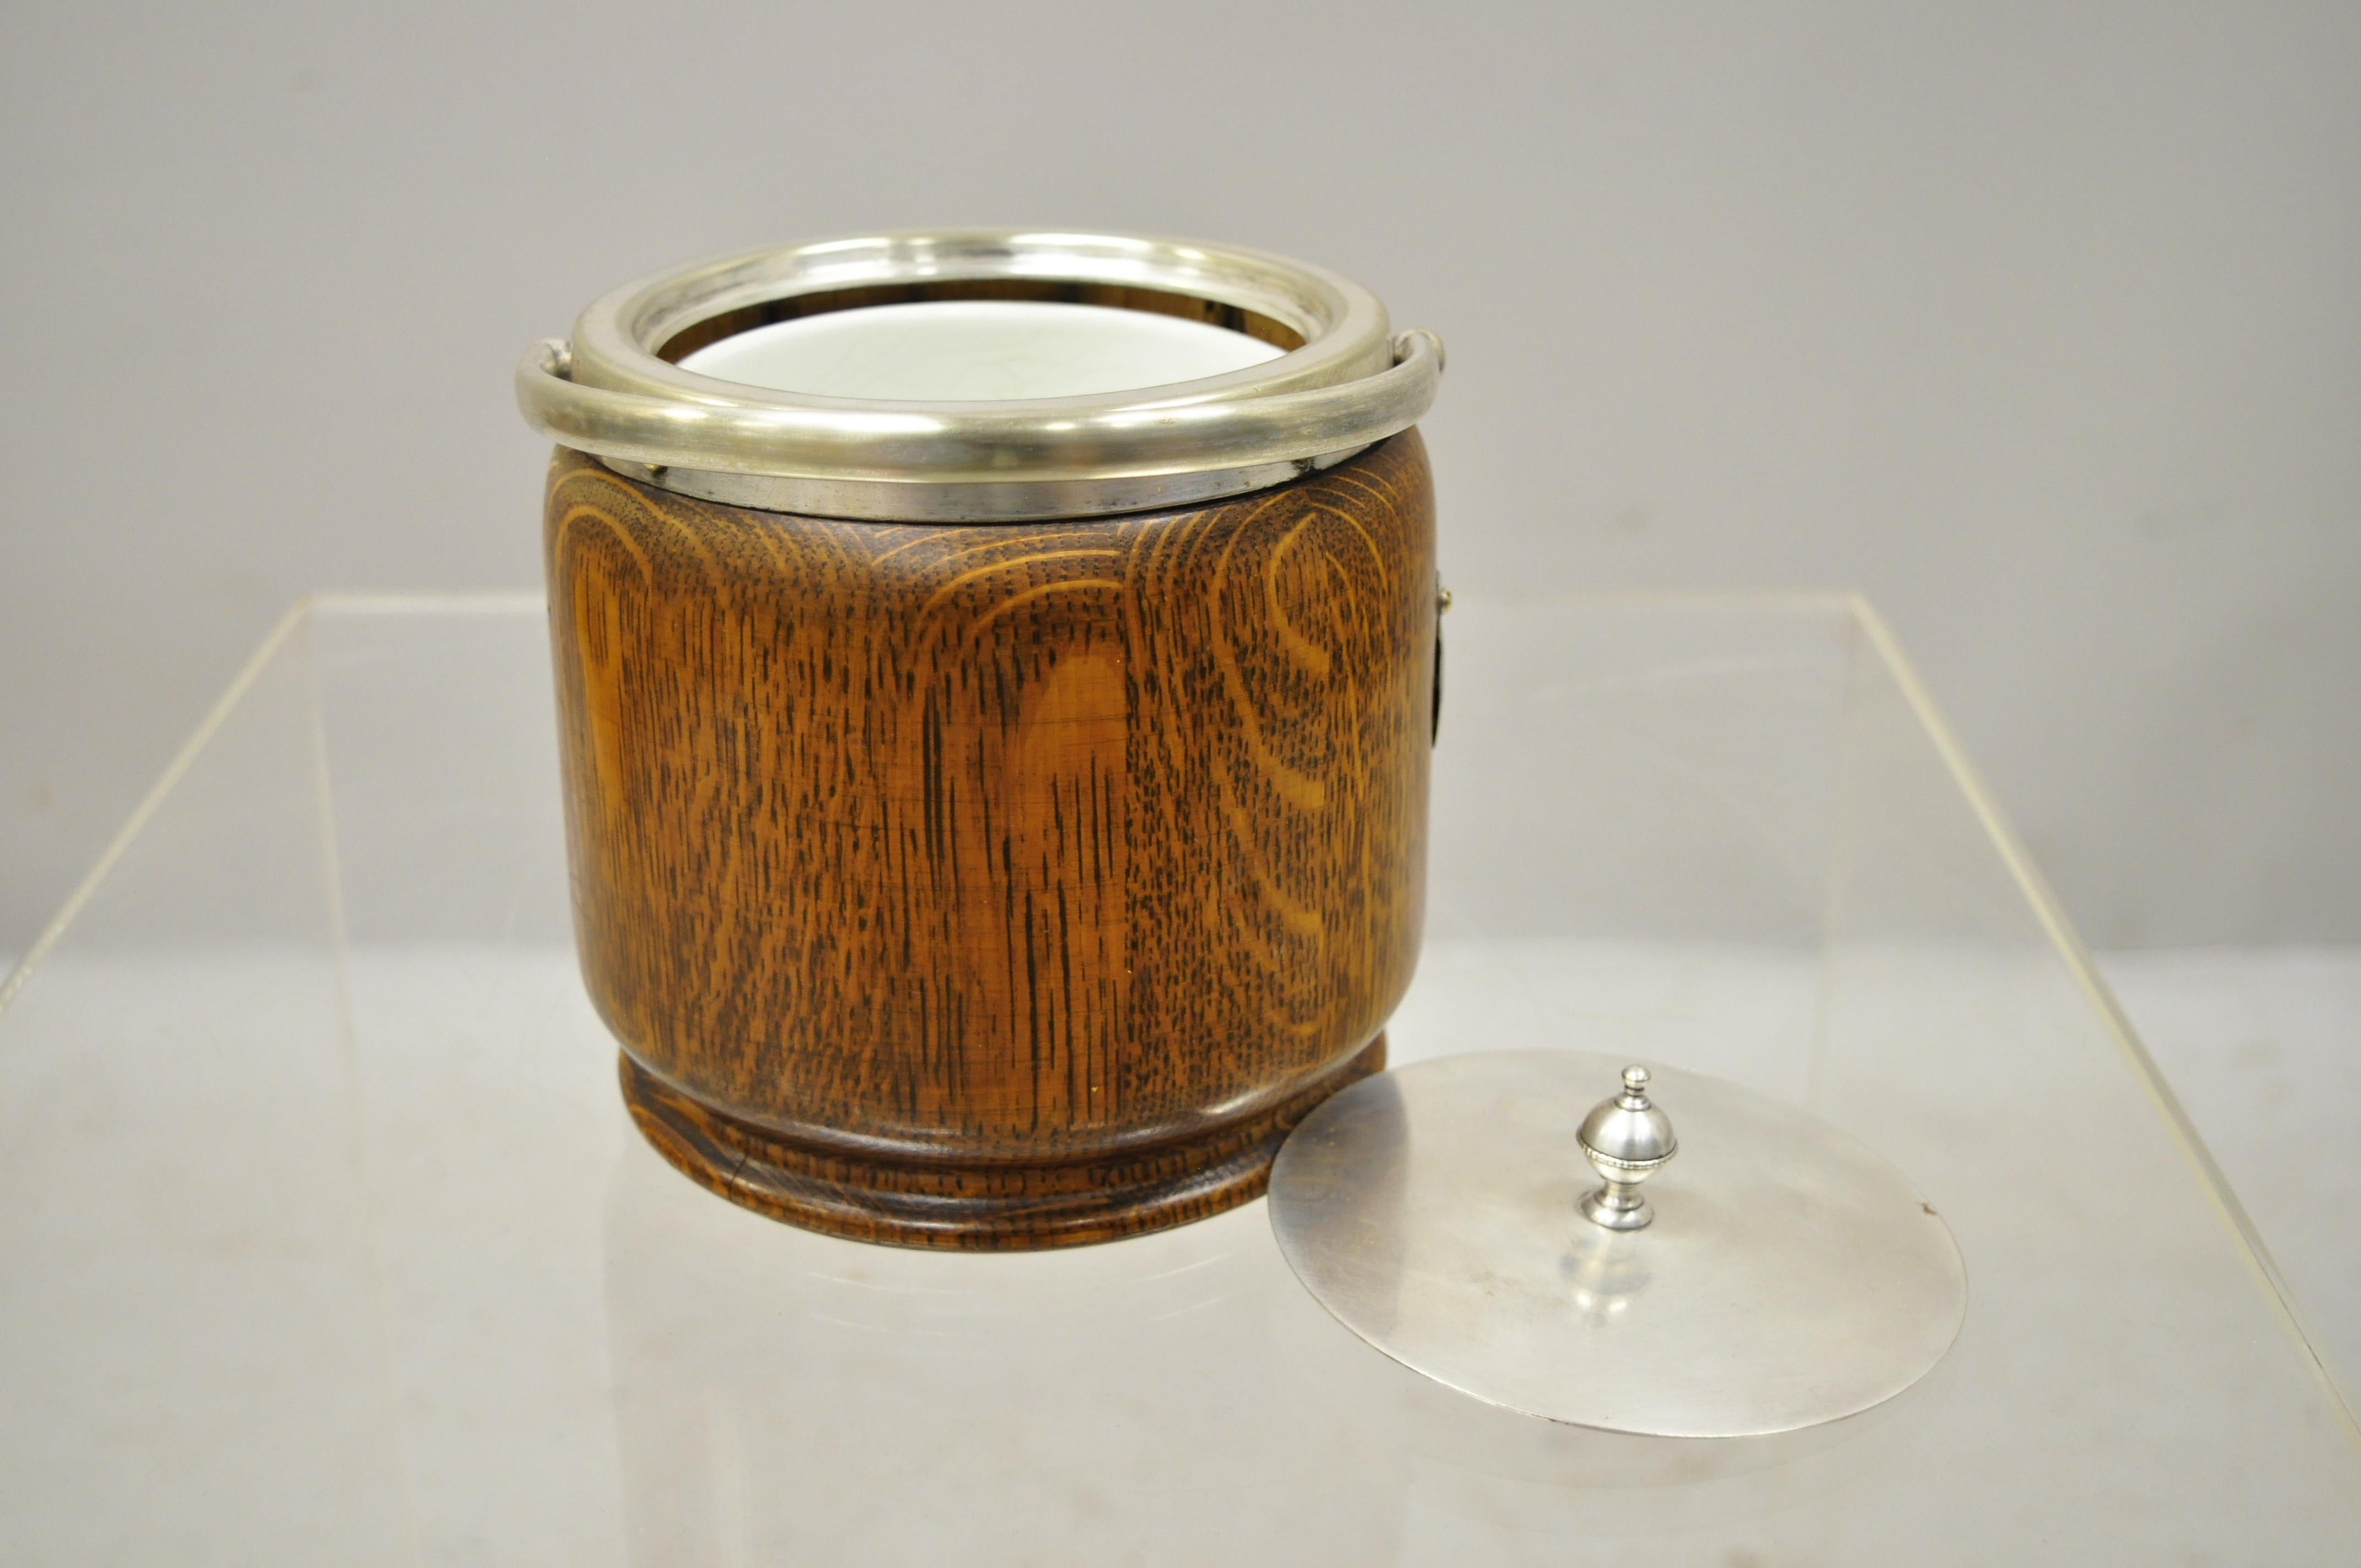 Antique H.C. & C. English silver plate and oak biscuit barrel with lid and liner. Item features silver plated ormolu, ironstone pottery lines, marked 